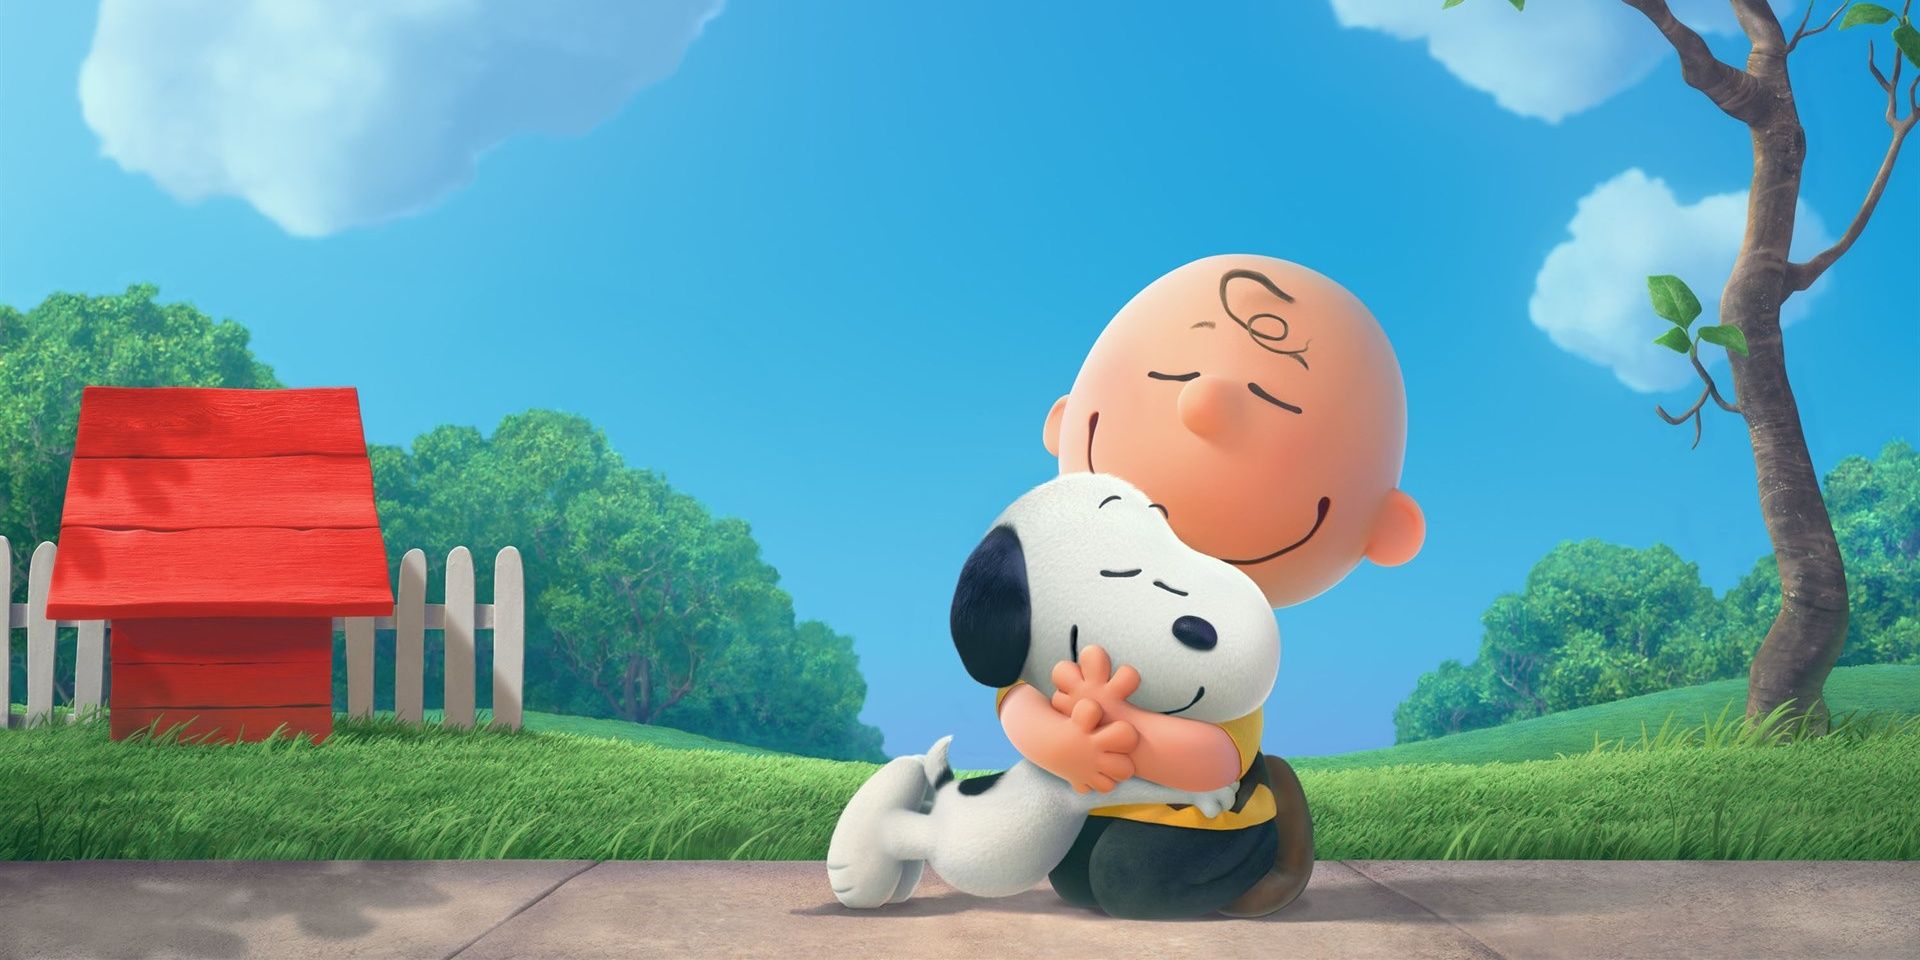 The Peanuts Movie is a sweet succinct adaptation that avoids being overbearing